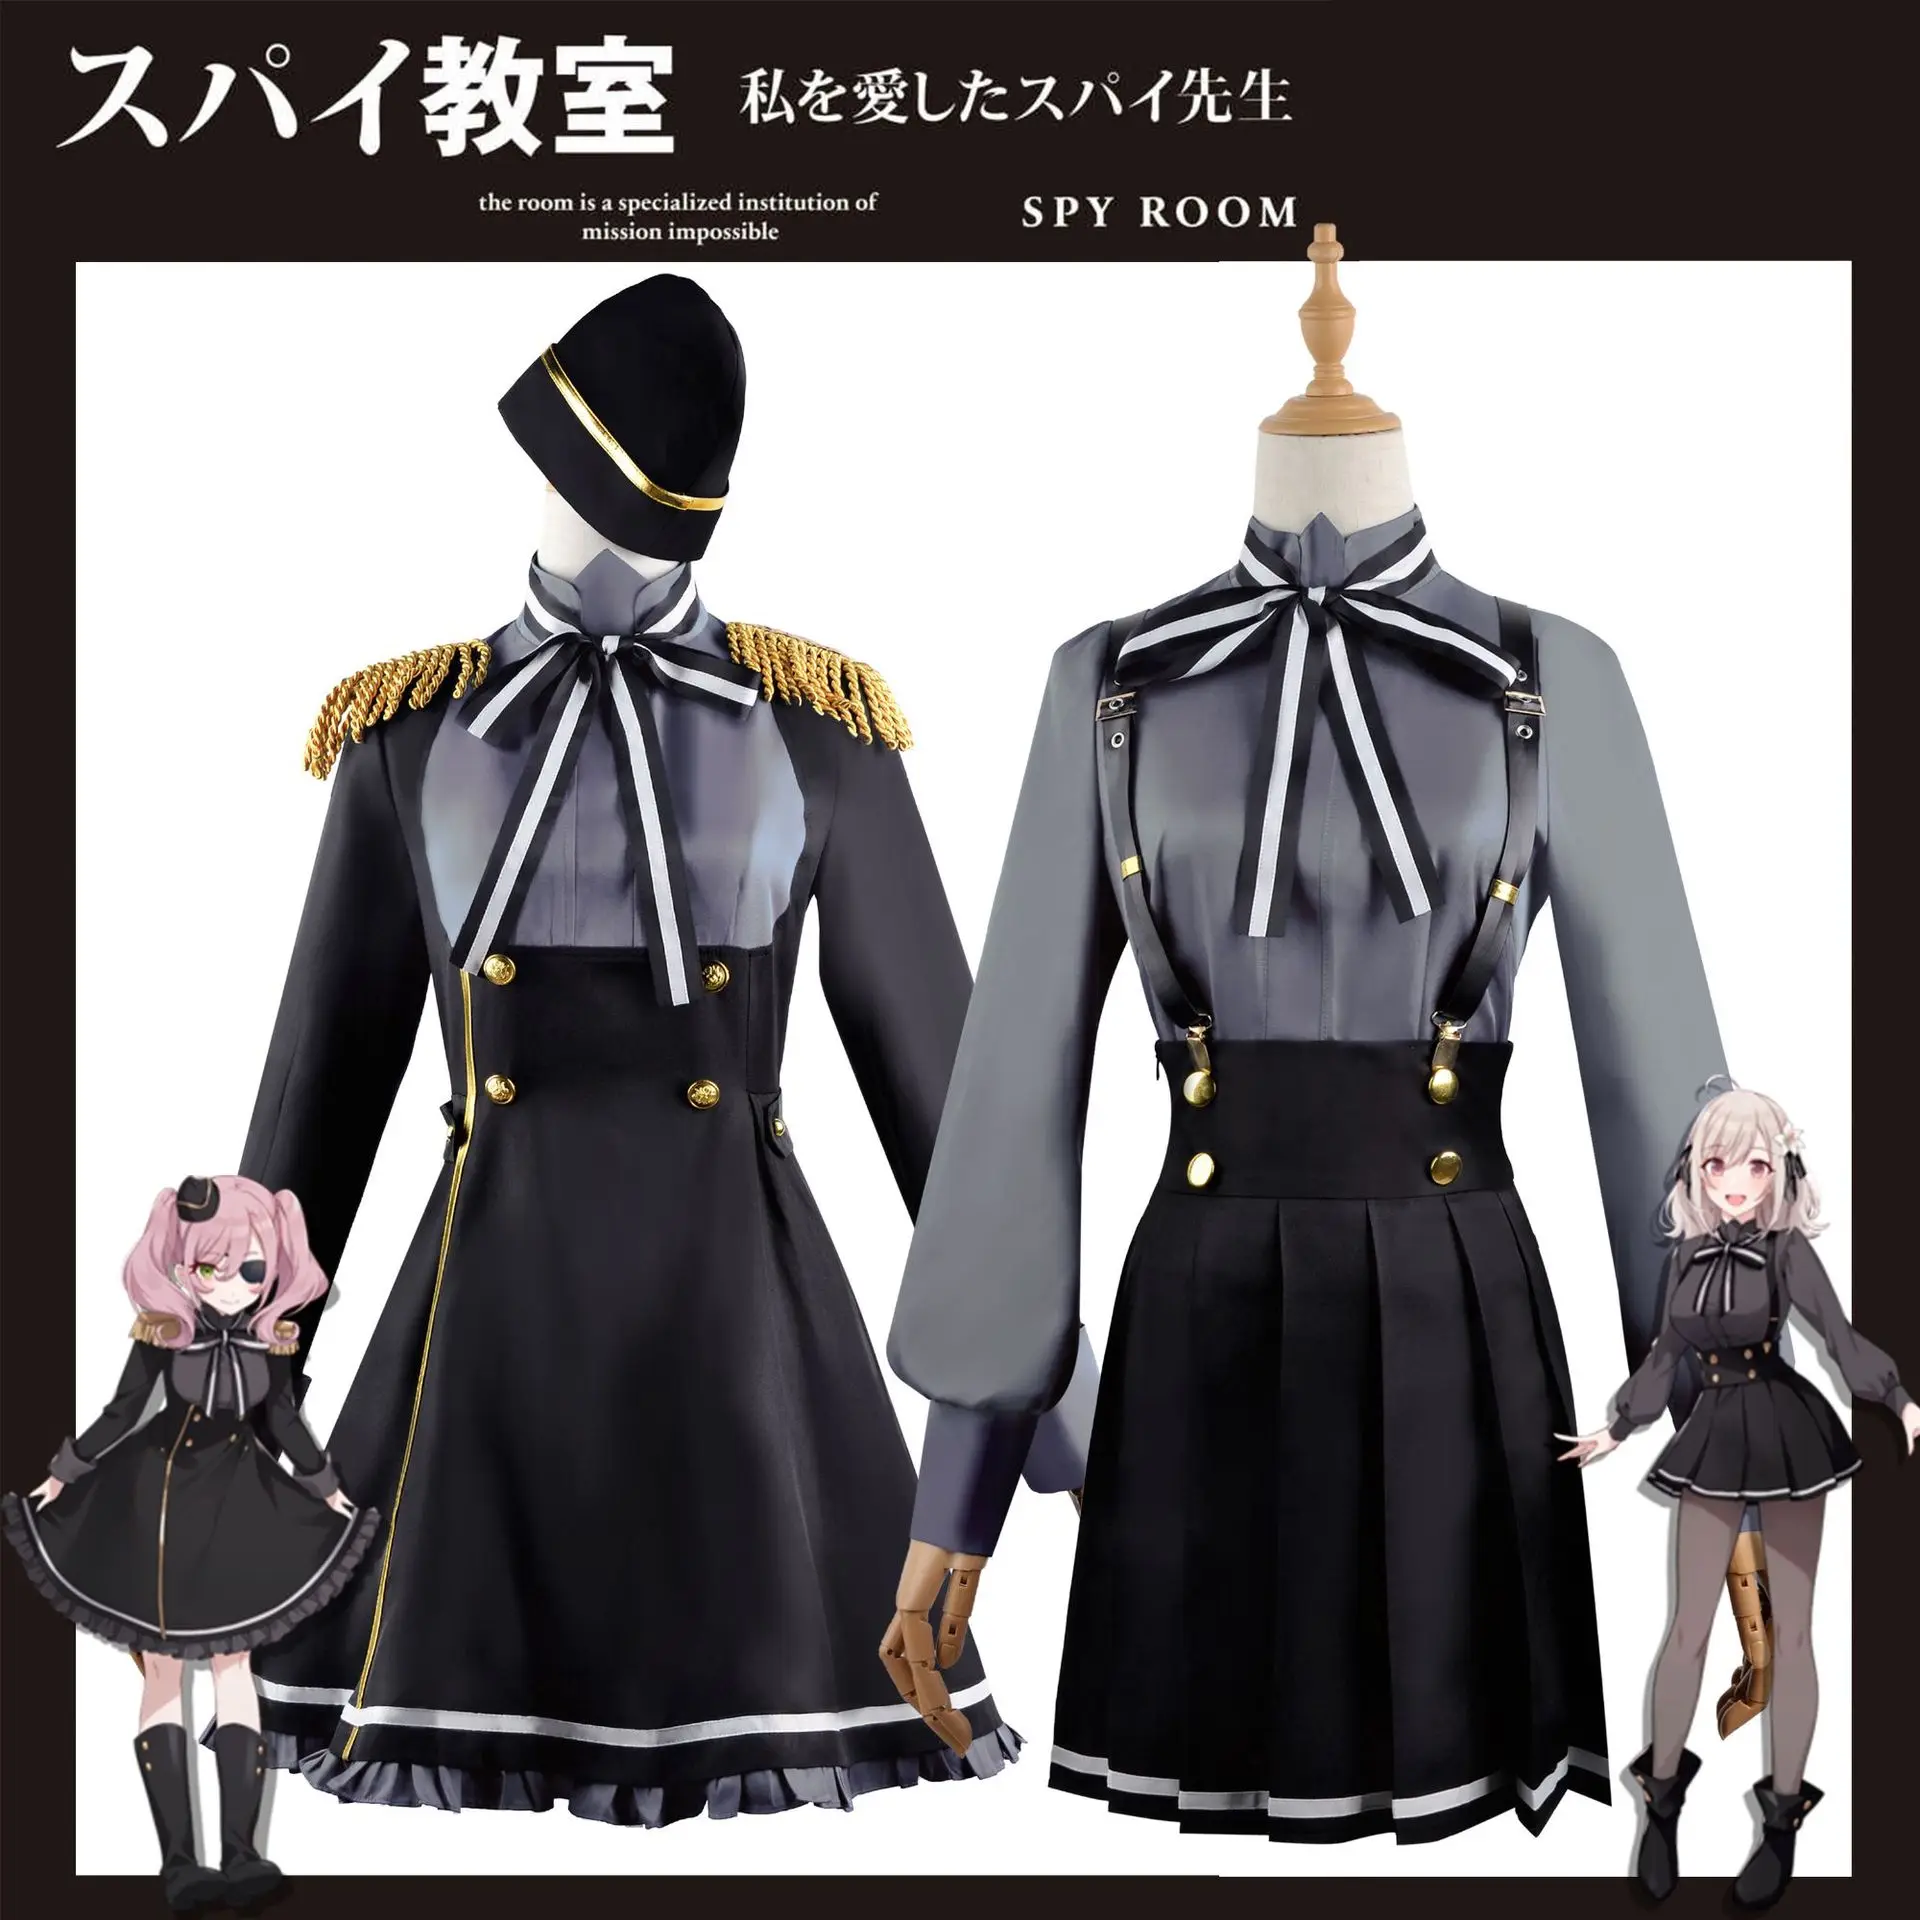 

Anime SPY Room Anette and Lily Cosplay Costume Lolita JK Dress Uniform Necktie Anime Role Play Suit Women Halloween Cosplay